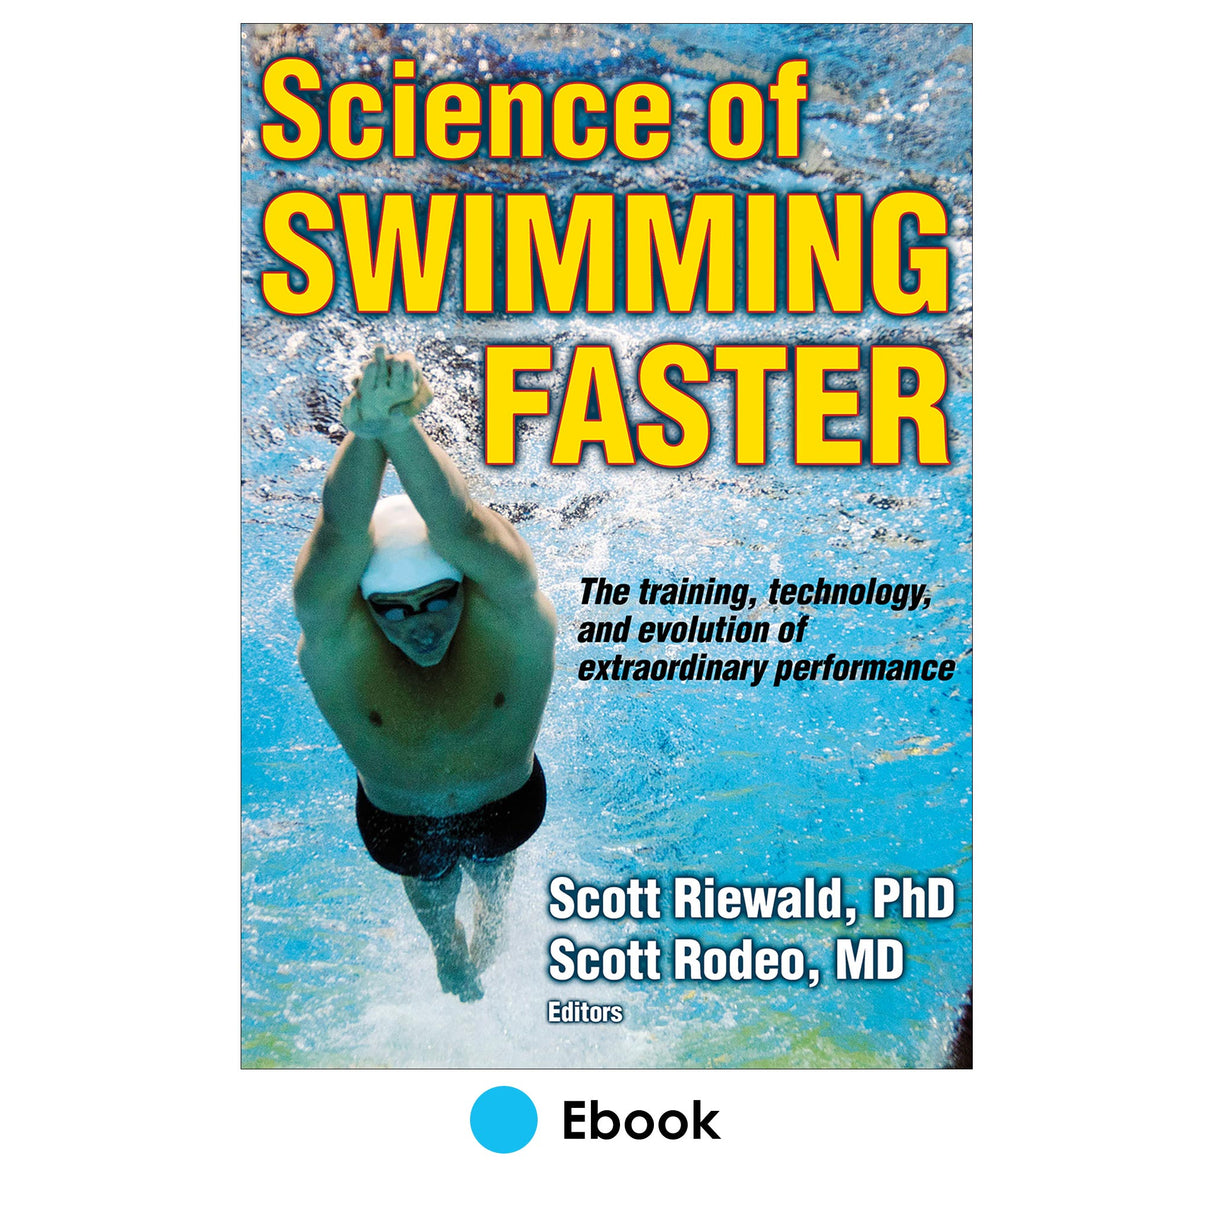 Science of Swimming Faster PDF